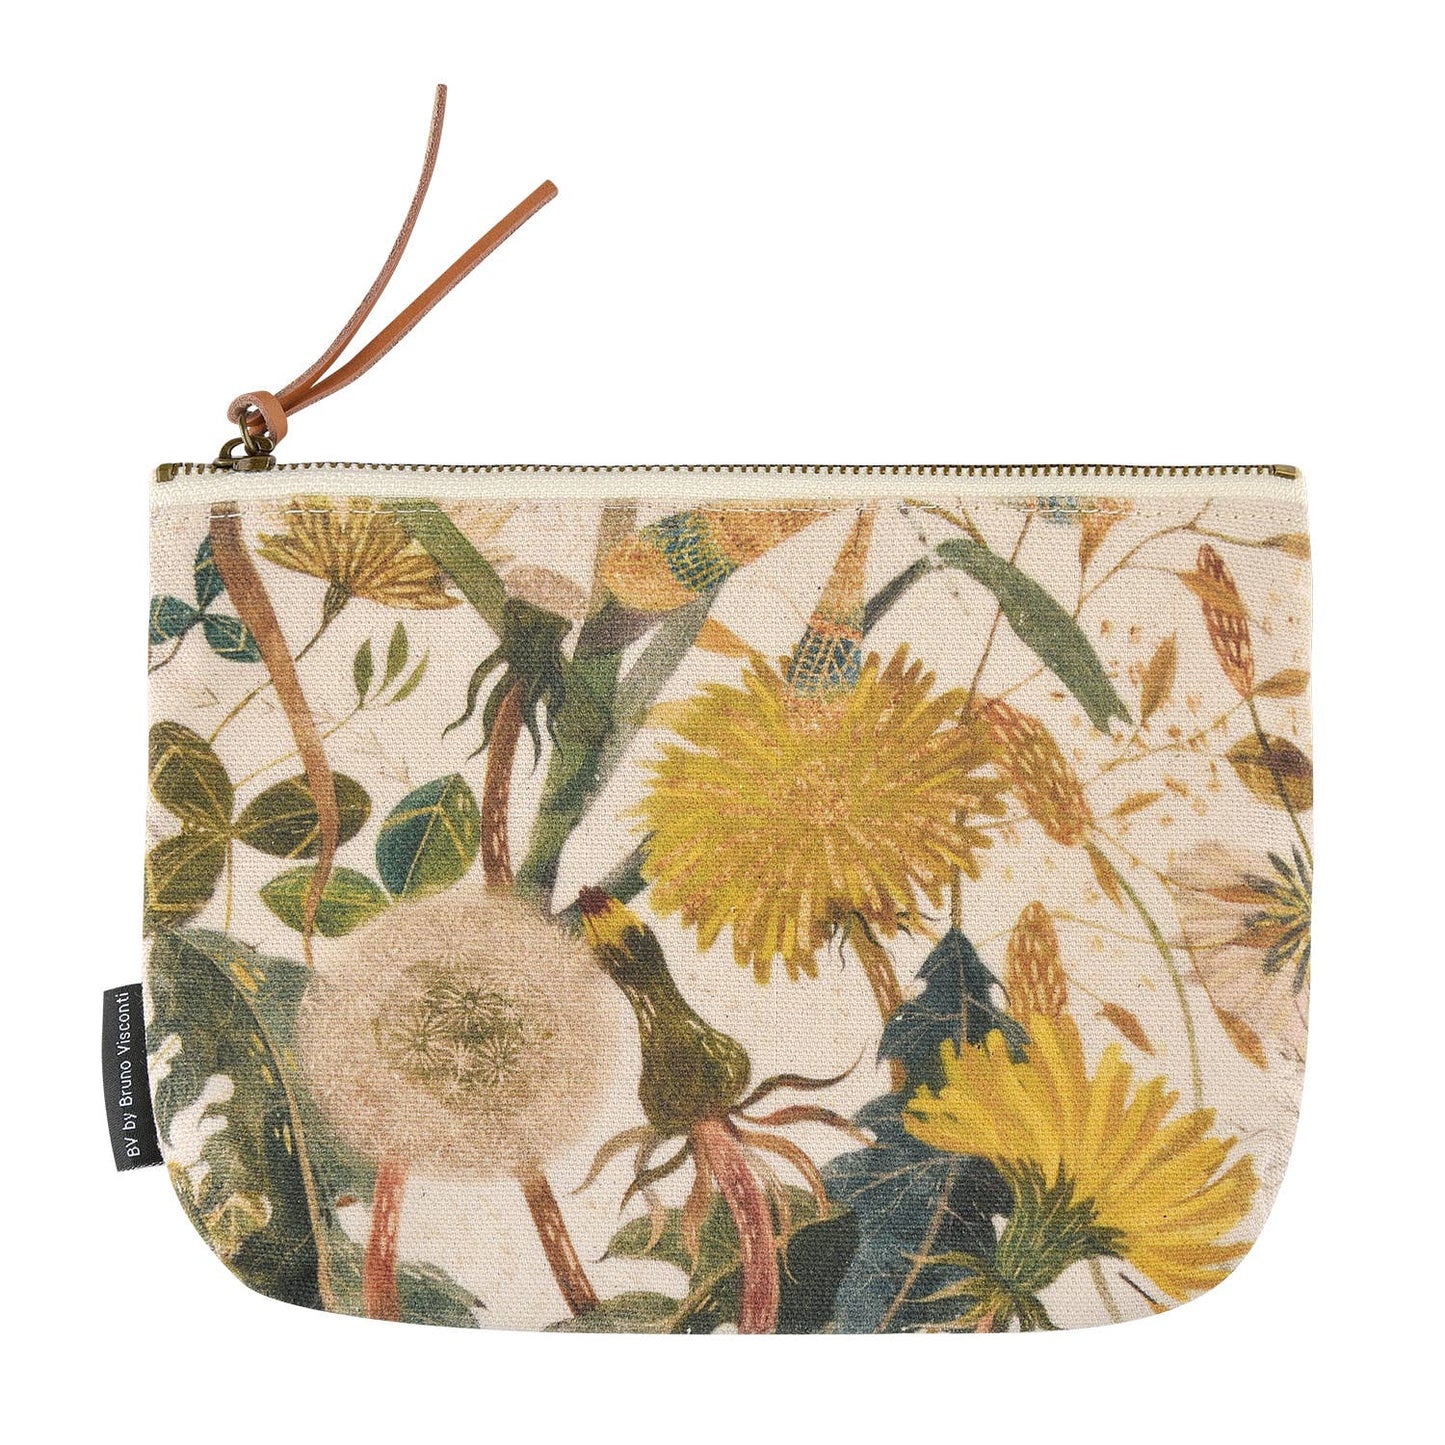 BV by Bruno Visconti - Pouch - Summer Greens